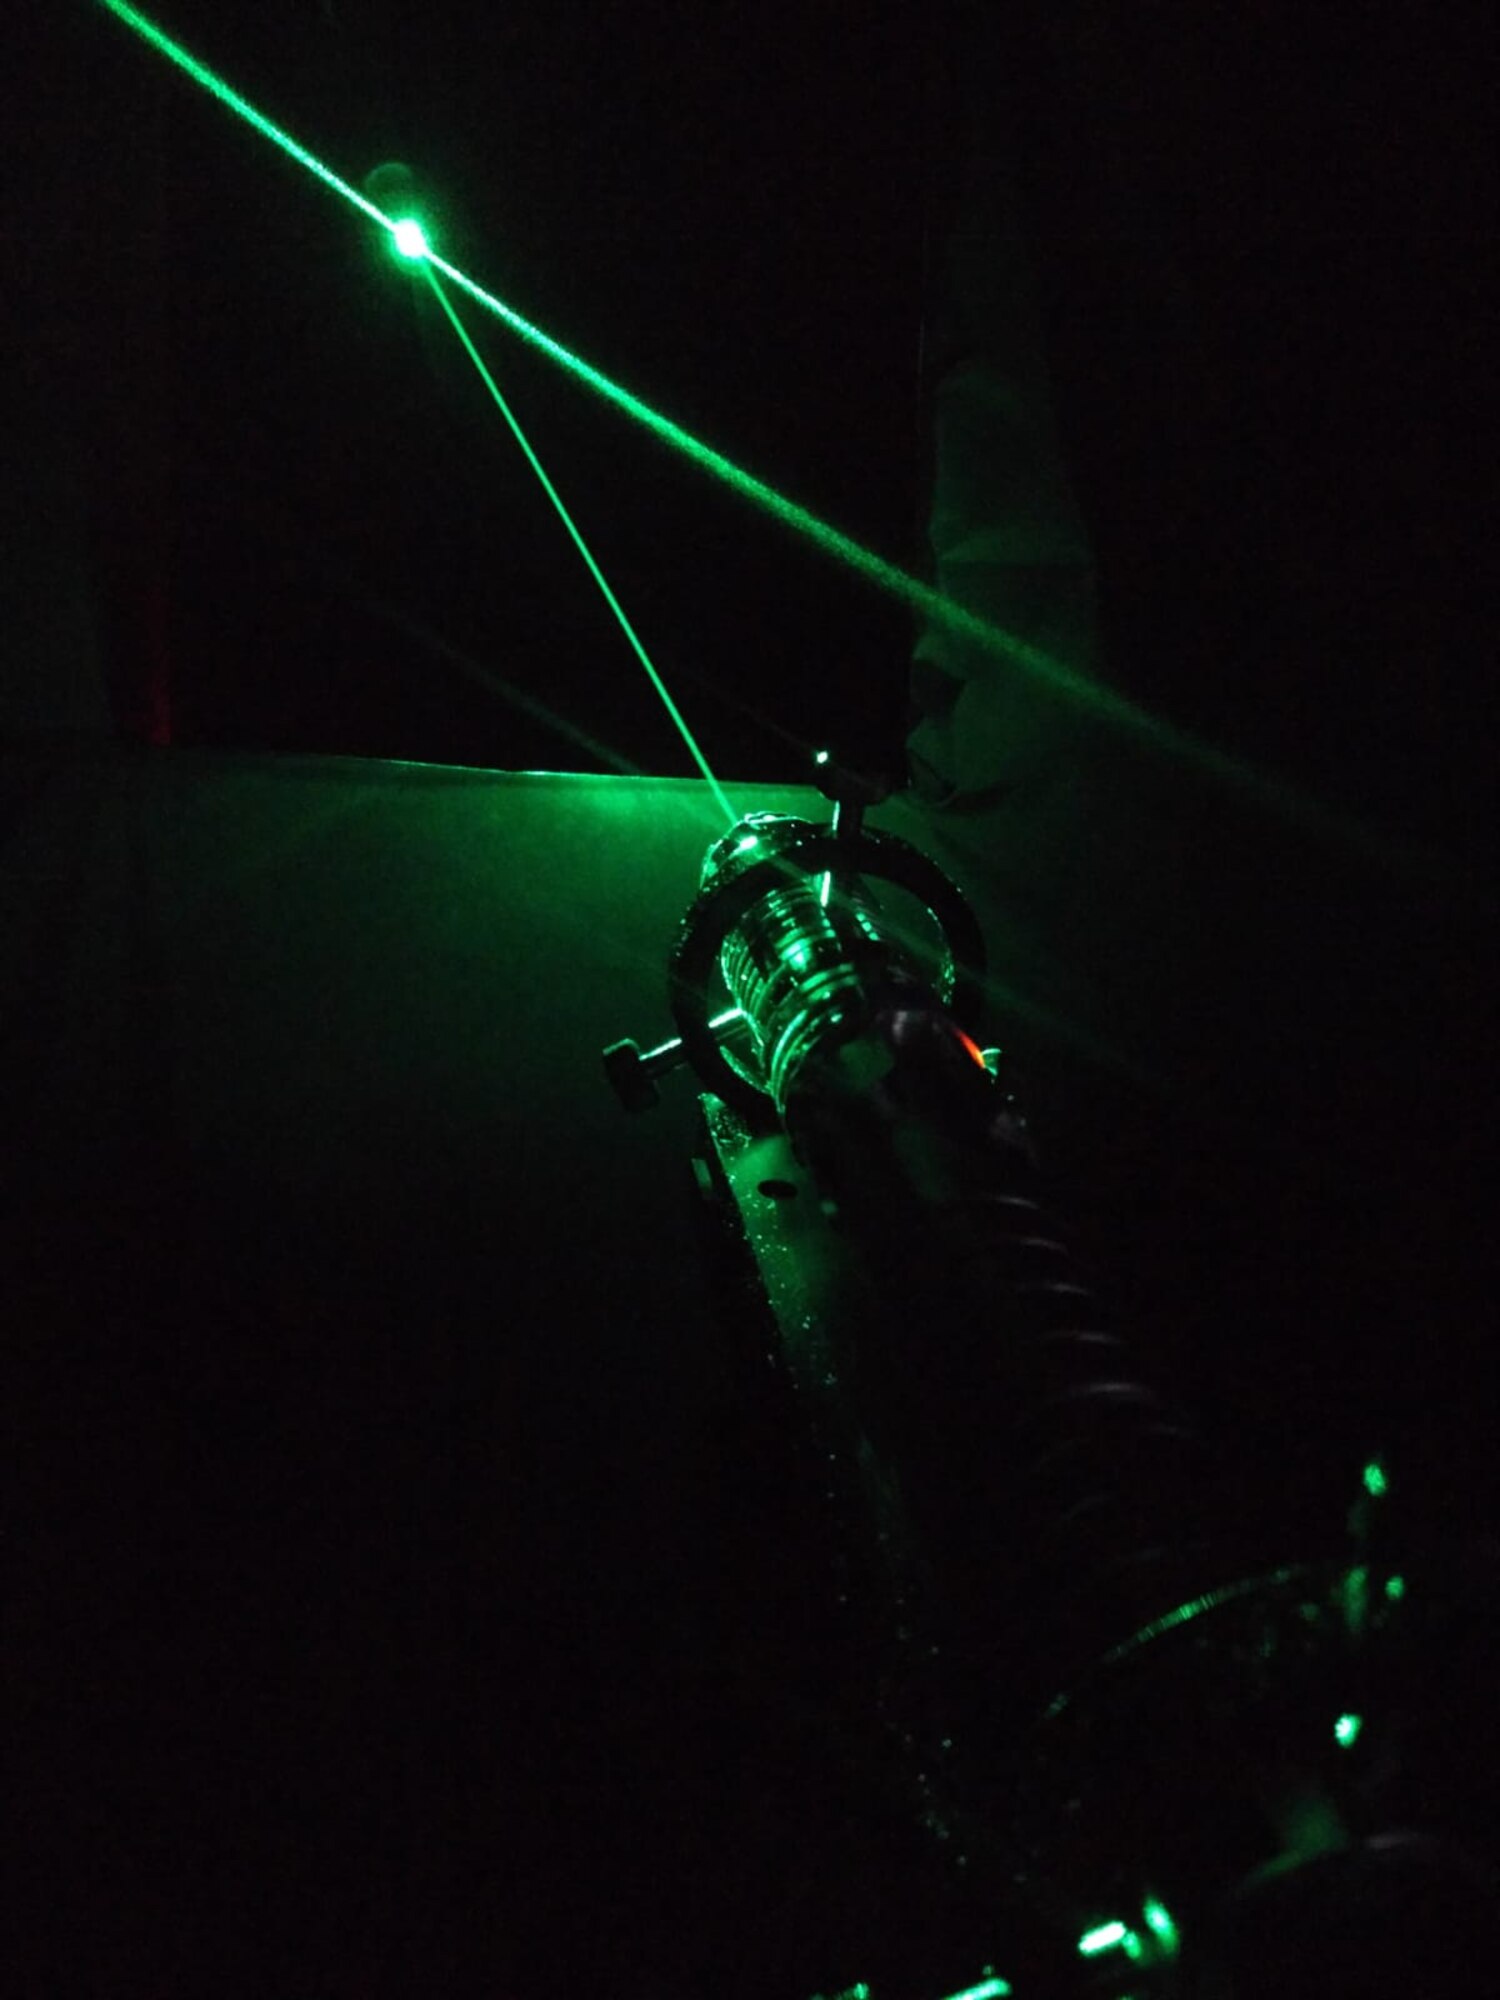 A handheld laser reflects off of a cable car during a NATO trial in which the U.S. and UK participated. The electro-optic survivability team experiments with lasers, which informs lasers’ potential use as directed energy weapons for U.S. and UK defense. (Photo by Chris Westgate, Dstl)